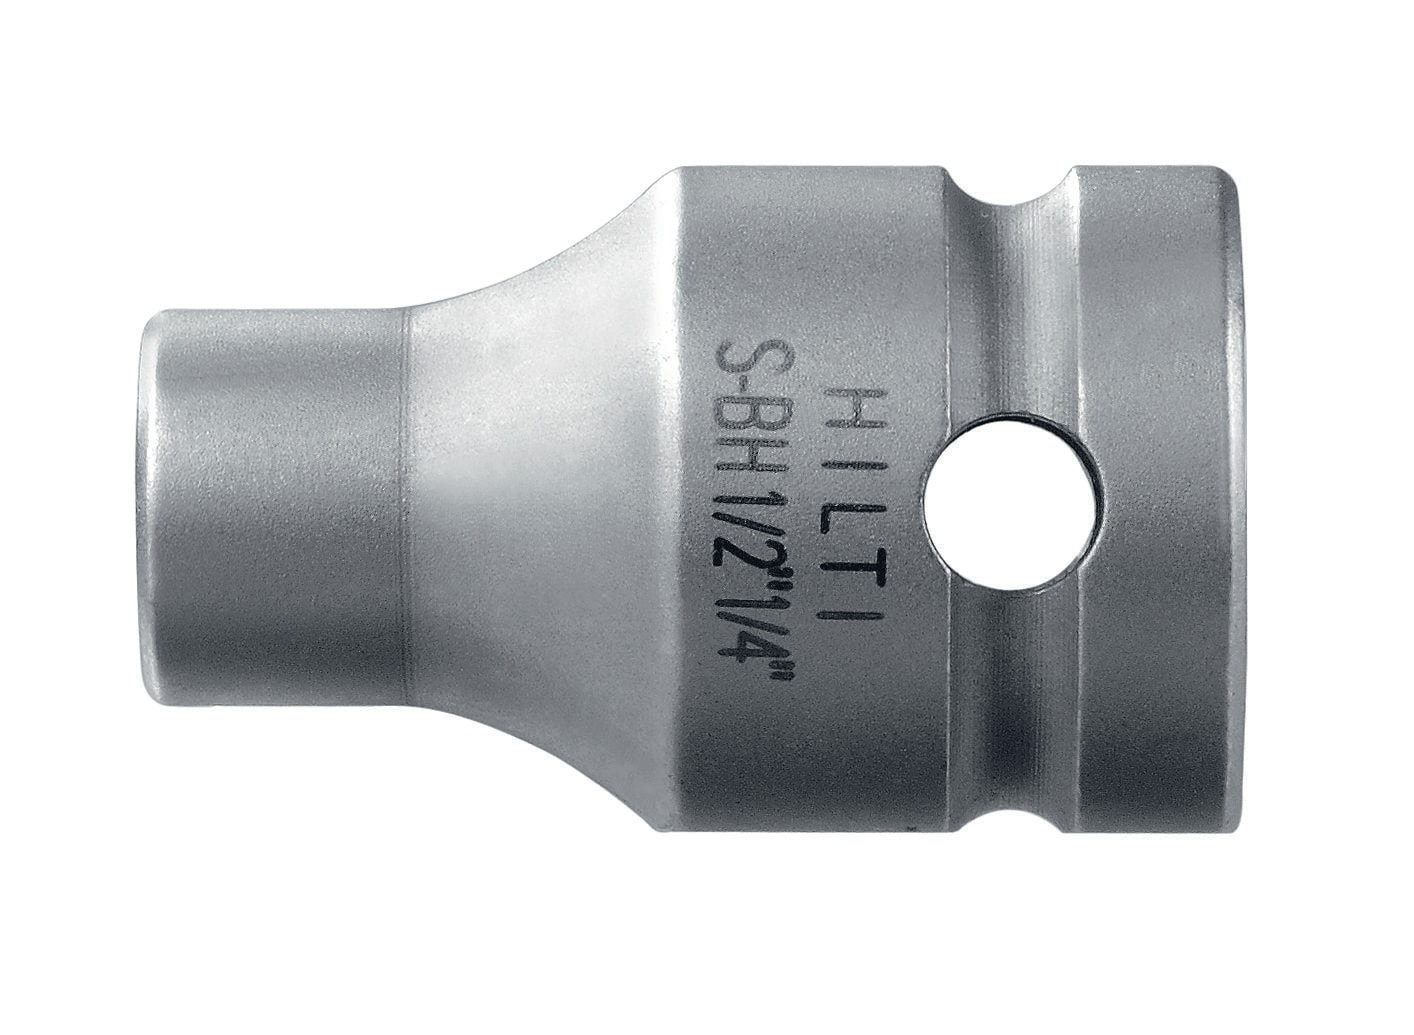 S-BH Bit holder - Accessories for Tools - Hilti Israel